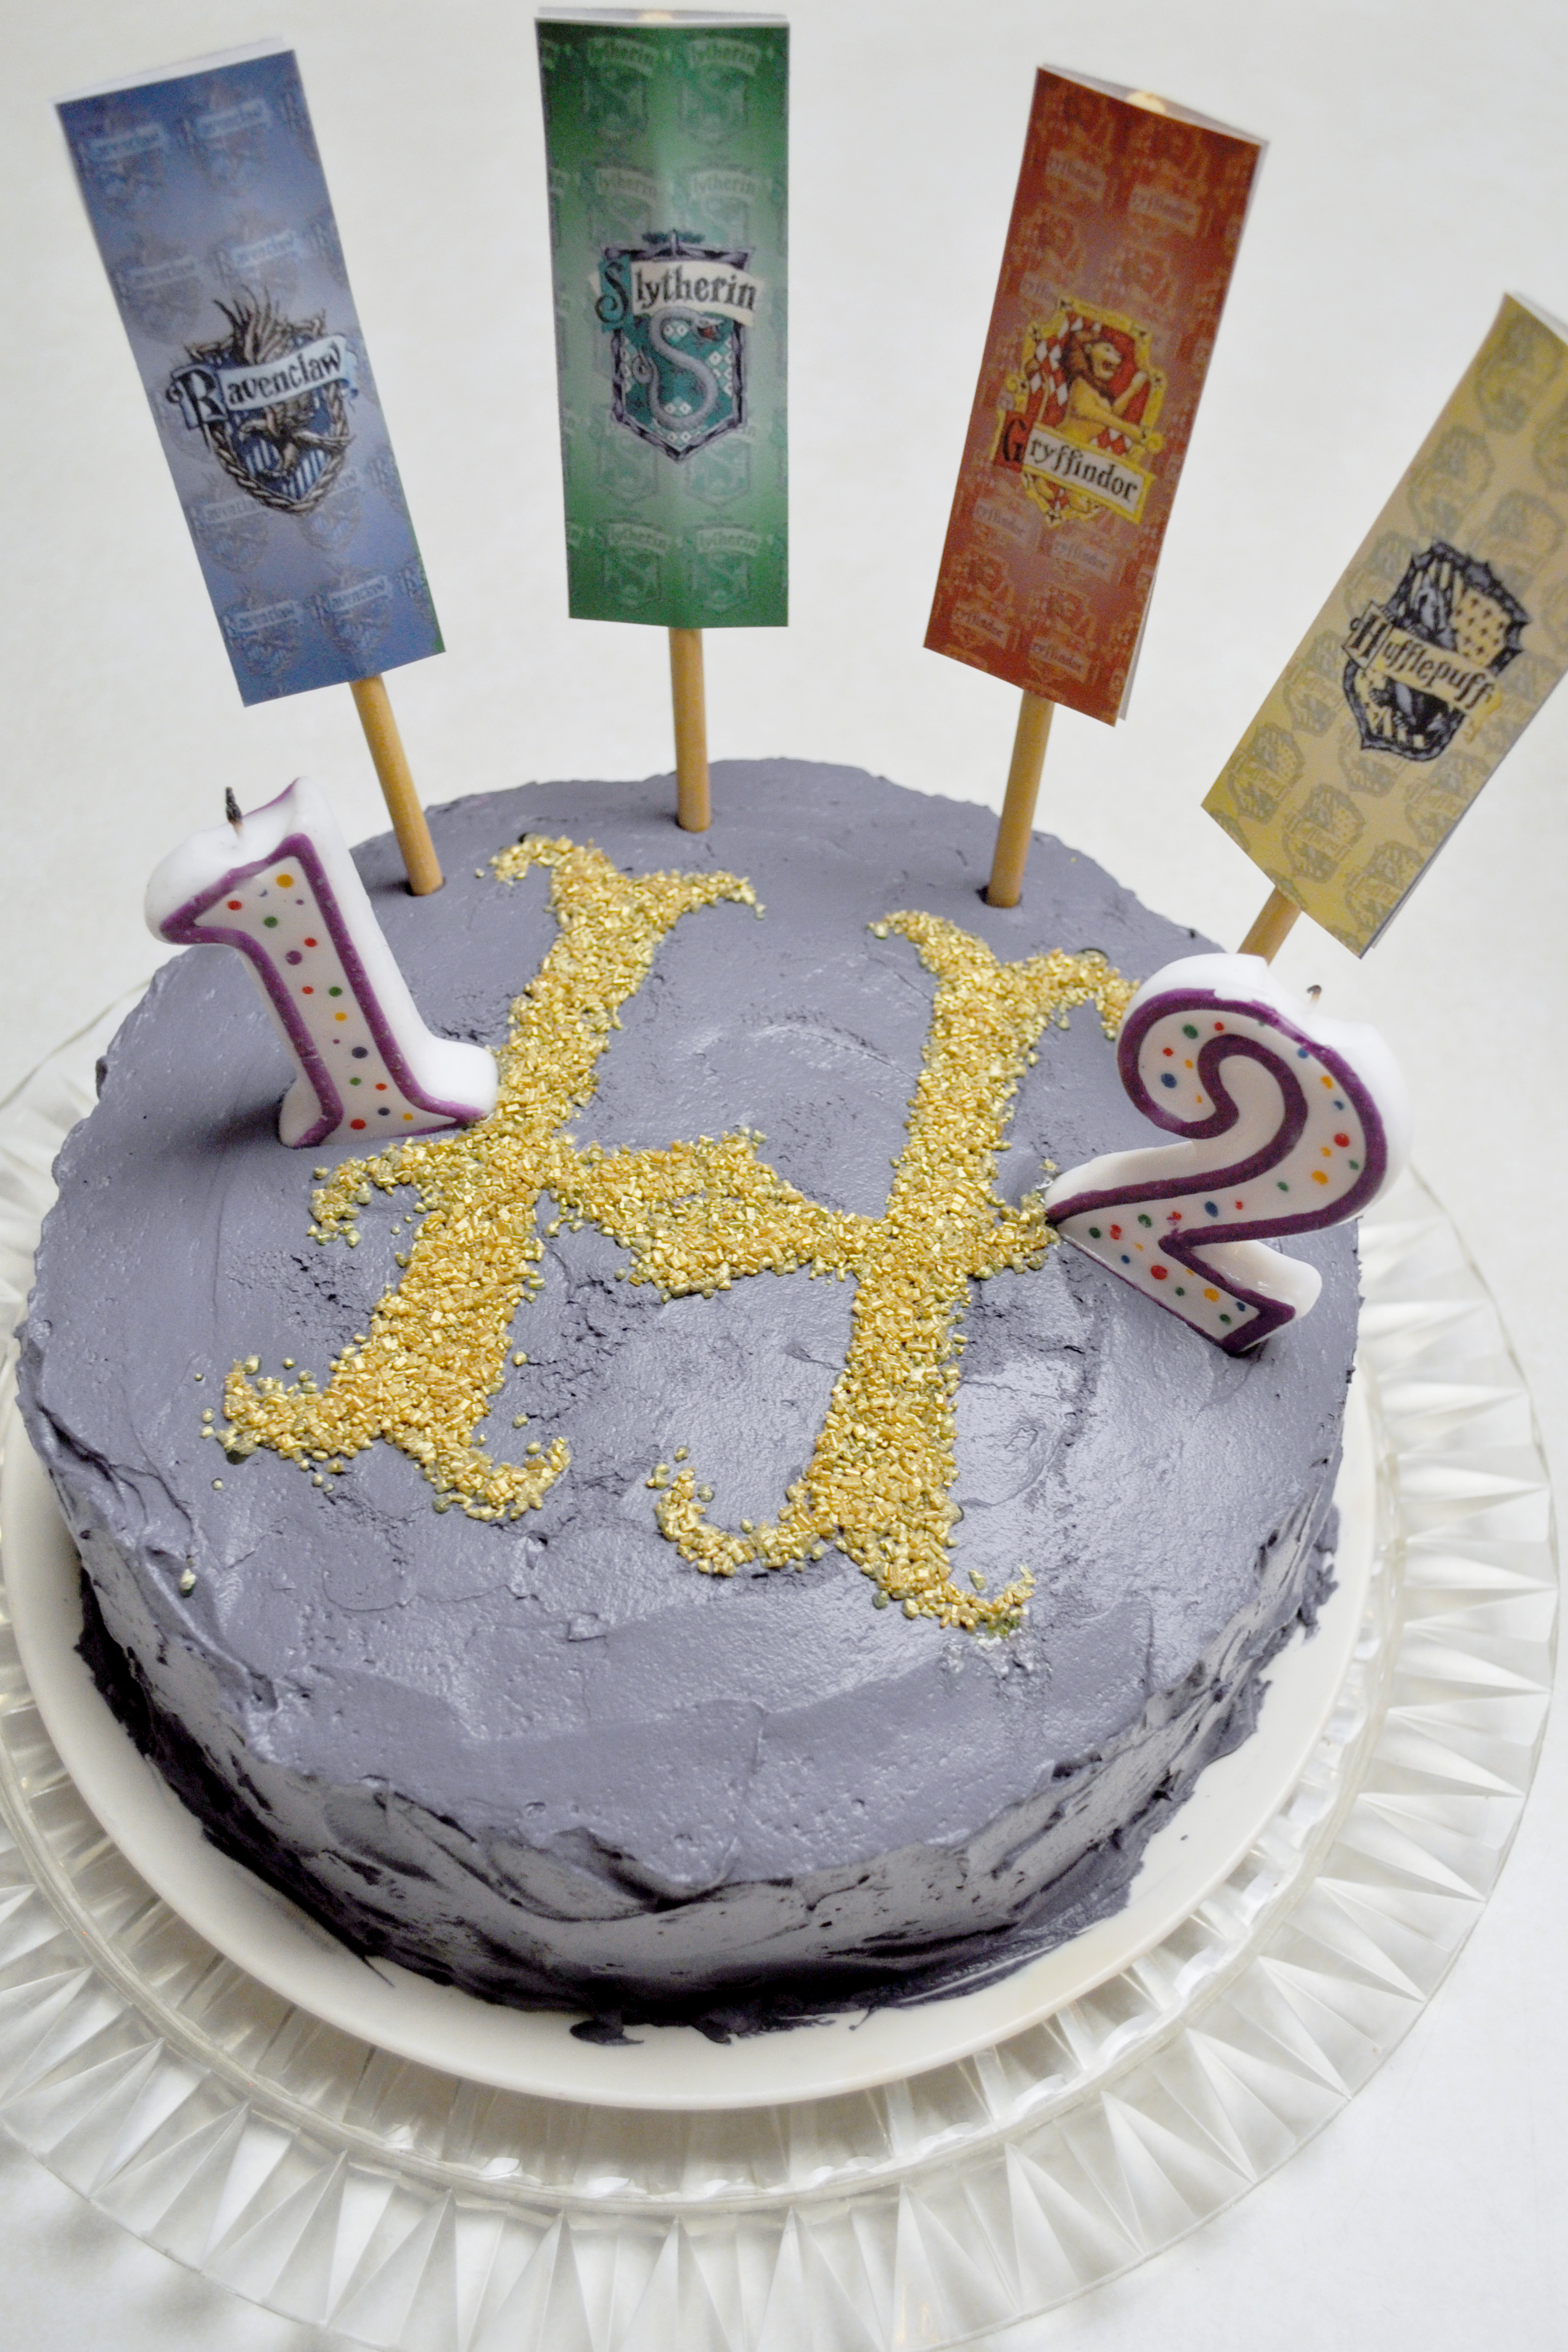 DIY Harry Potter Party - All details were created and implemented in 4 days! This is fun AND doable! {The Love Nerds}